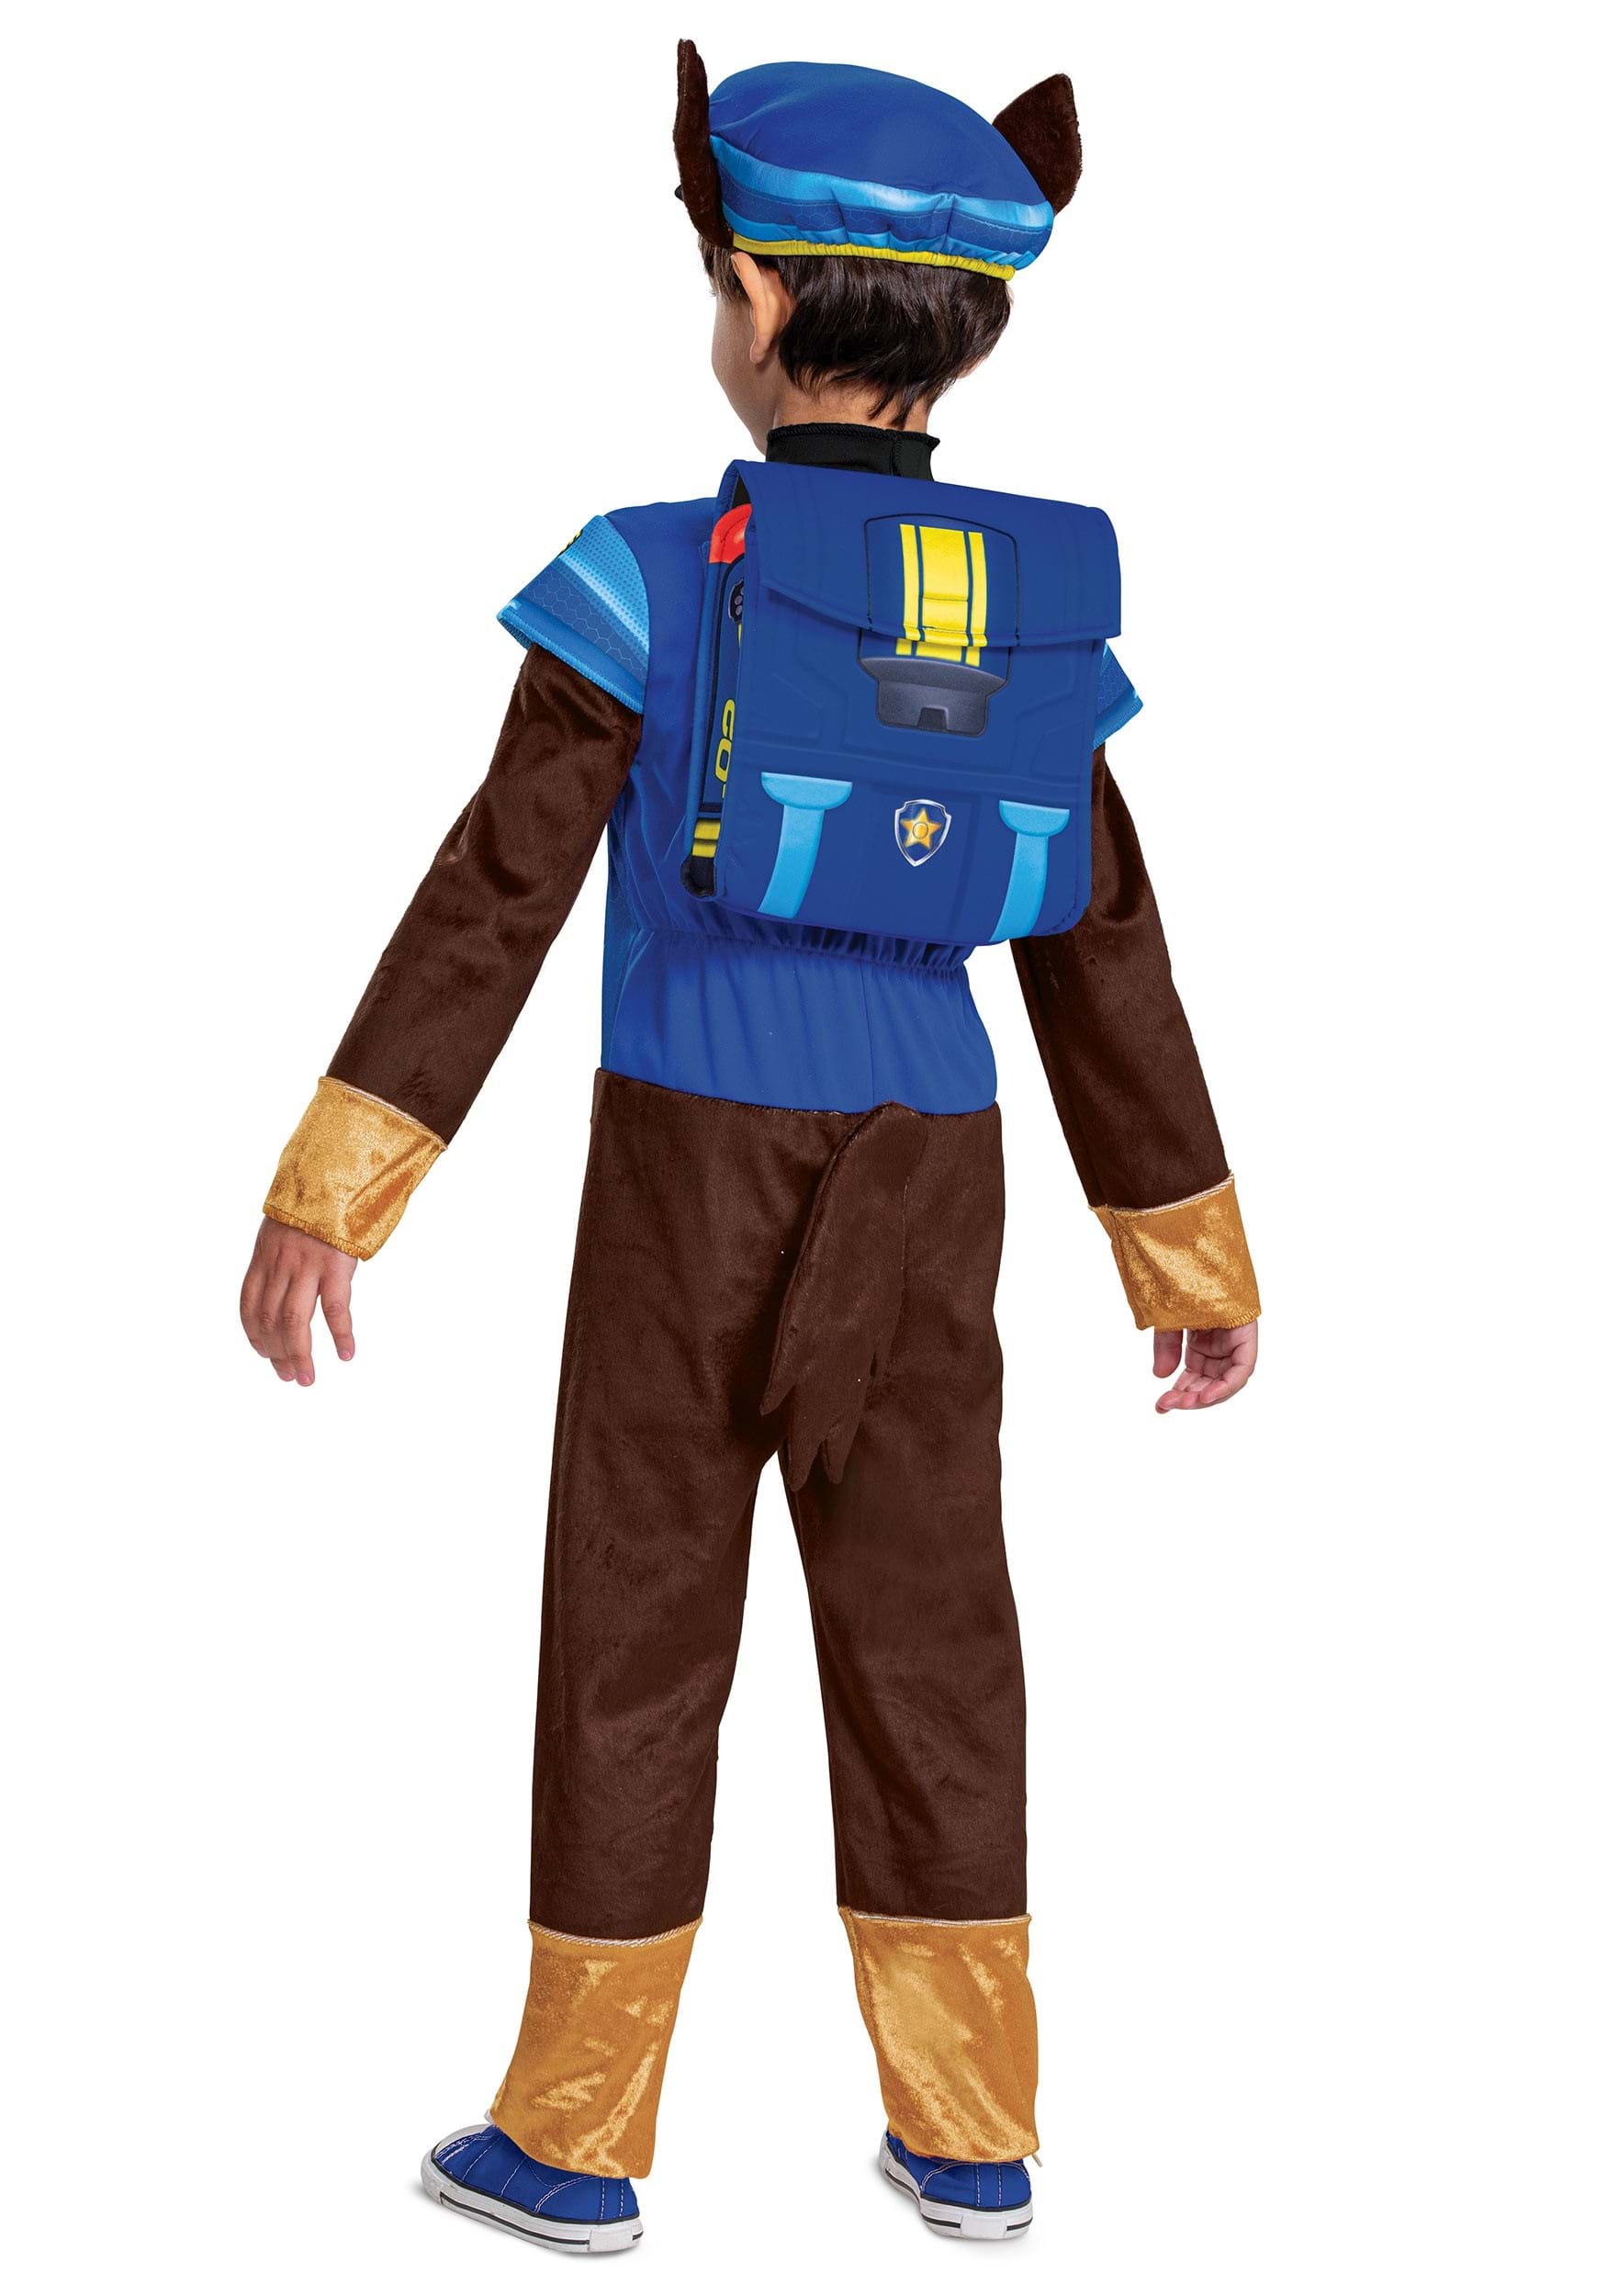 https://images.fun.com/products/73768/2-1-187649/paw-patrol-movie-chase-deluxe-toddler-kids-costume-alt-1.jpg